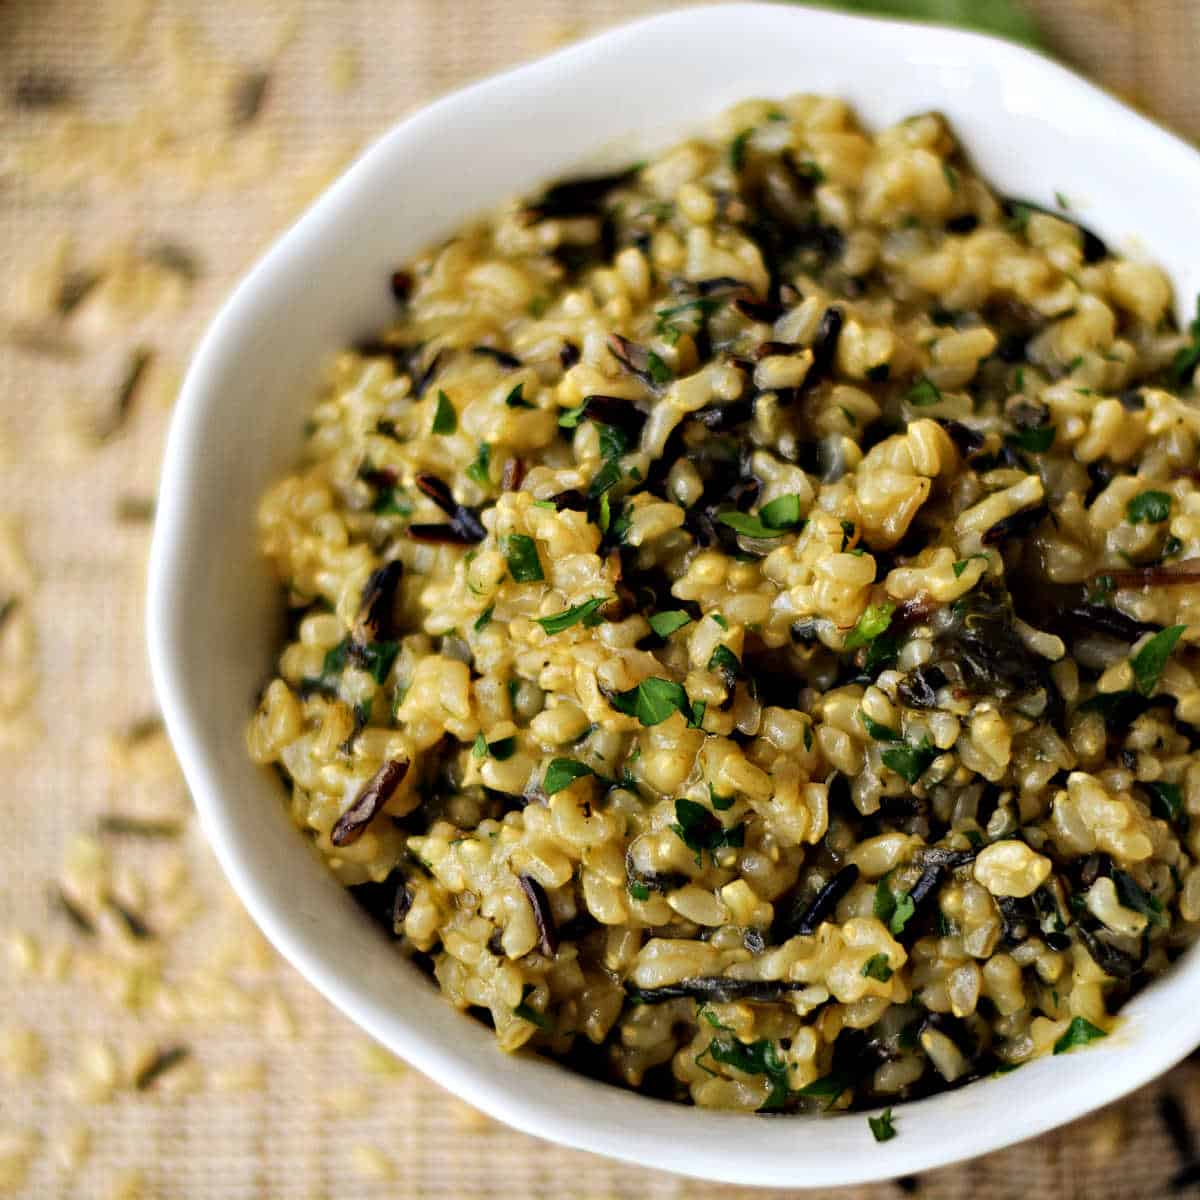 Savory Wild and Brown Rice Pilaf